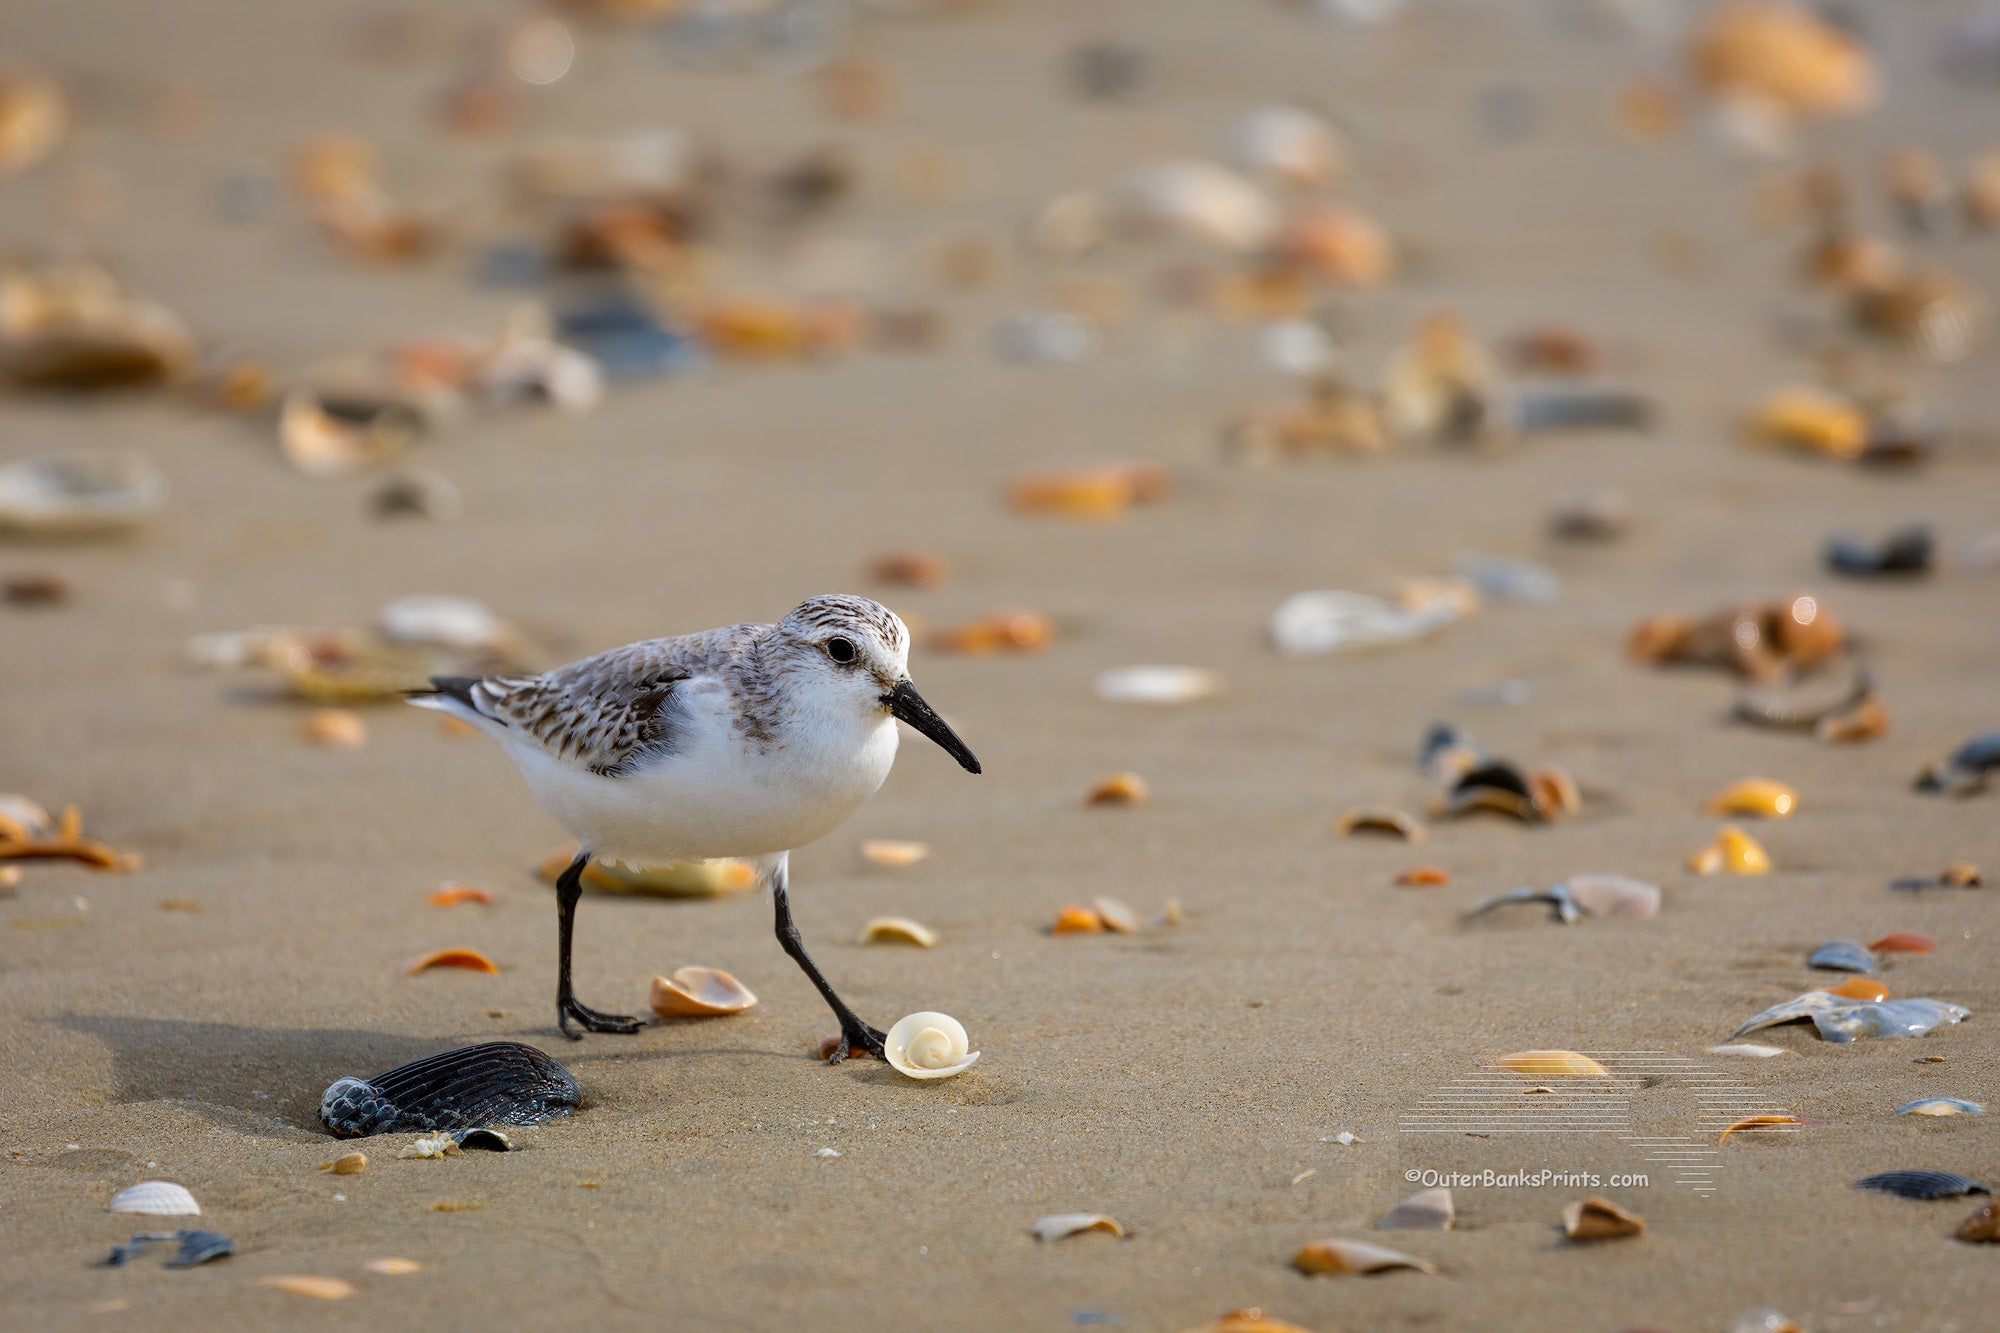 Sandpiper on the go searching for food among the washed ub shells on the beach at Frisco North Carolina.